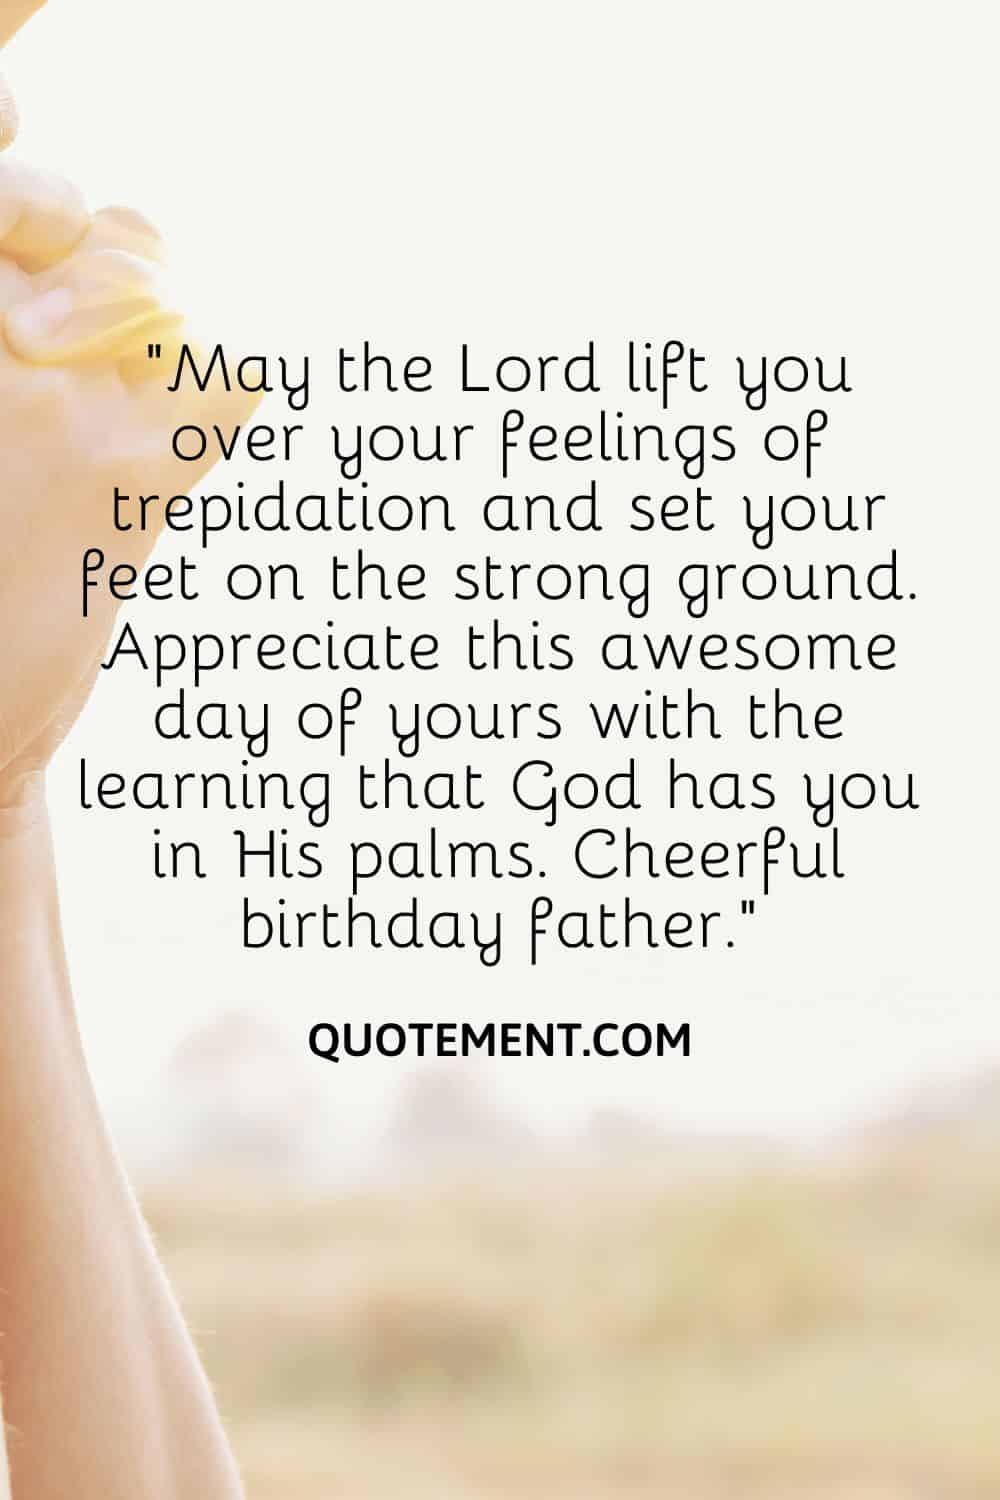 “May the Lord lift you over your feelings of trepidation and set your feet on the strong ground.